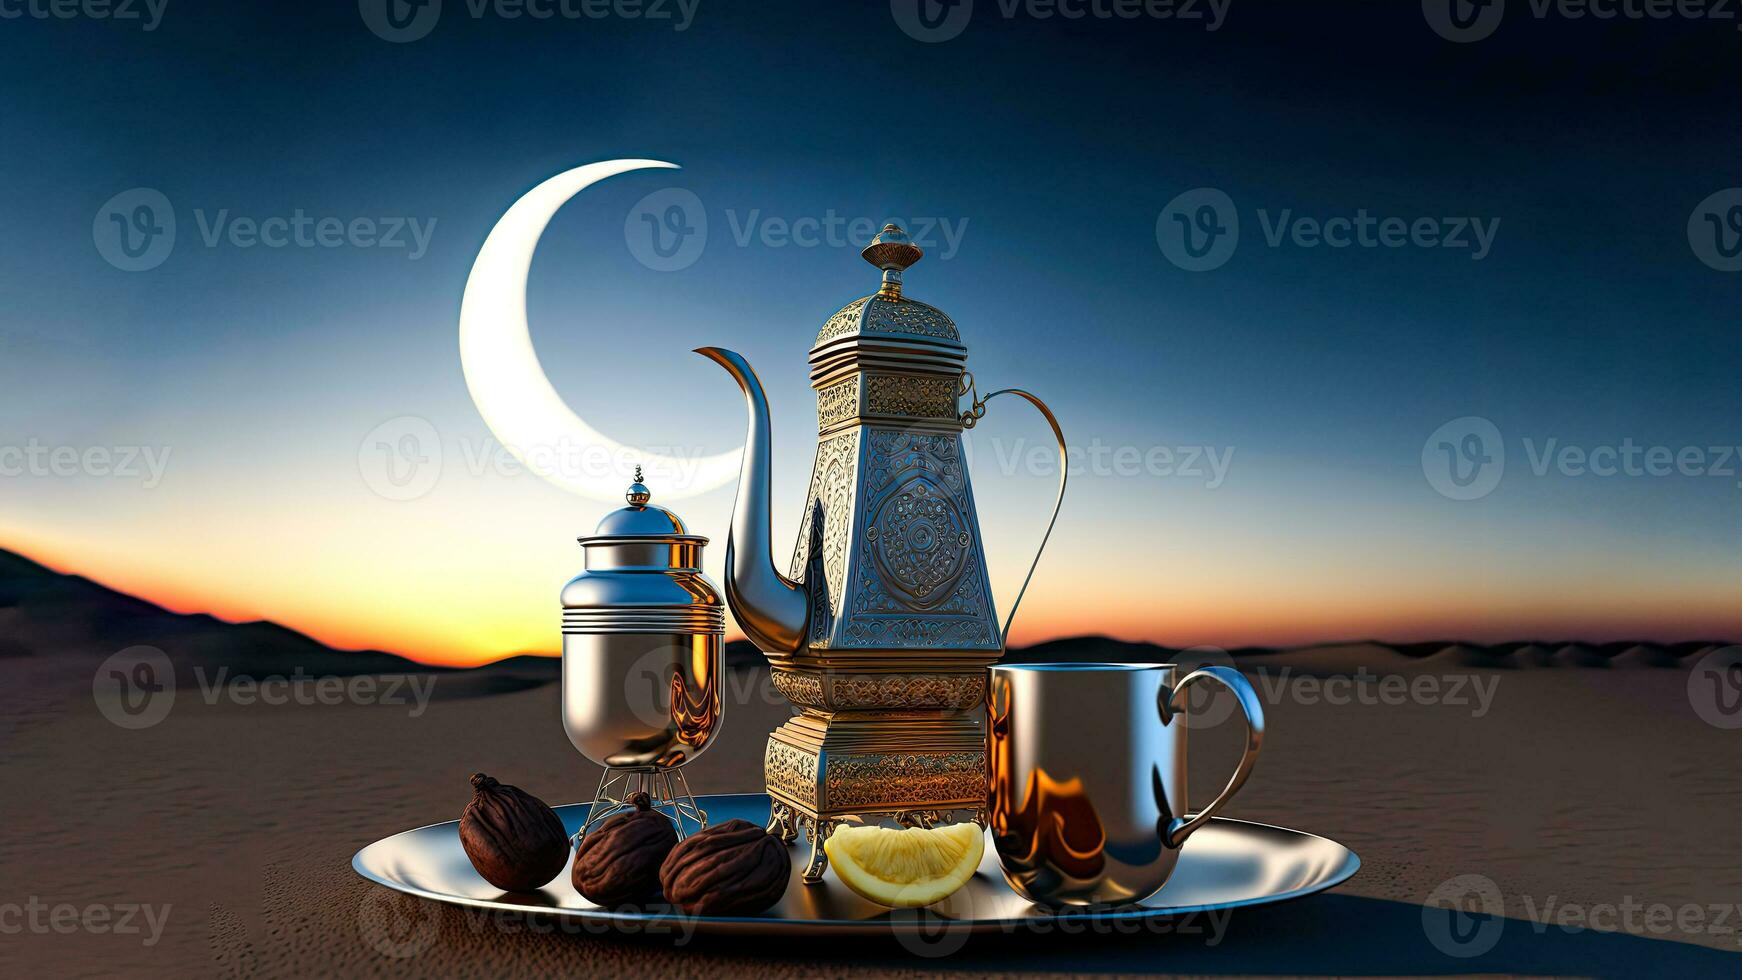 3D Render of Arabic Tea or Coffee Pot With Mug, Fruit On Tray In Night Time. Islamic Religious Concept. photo